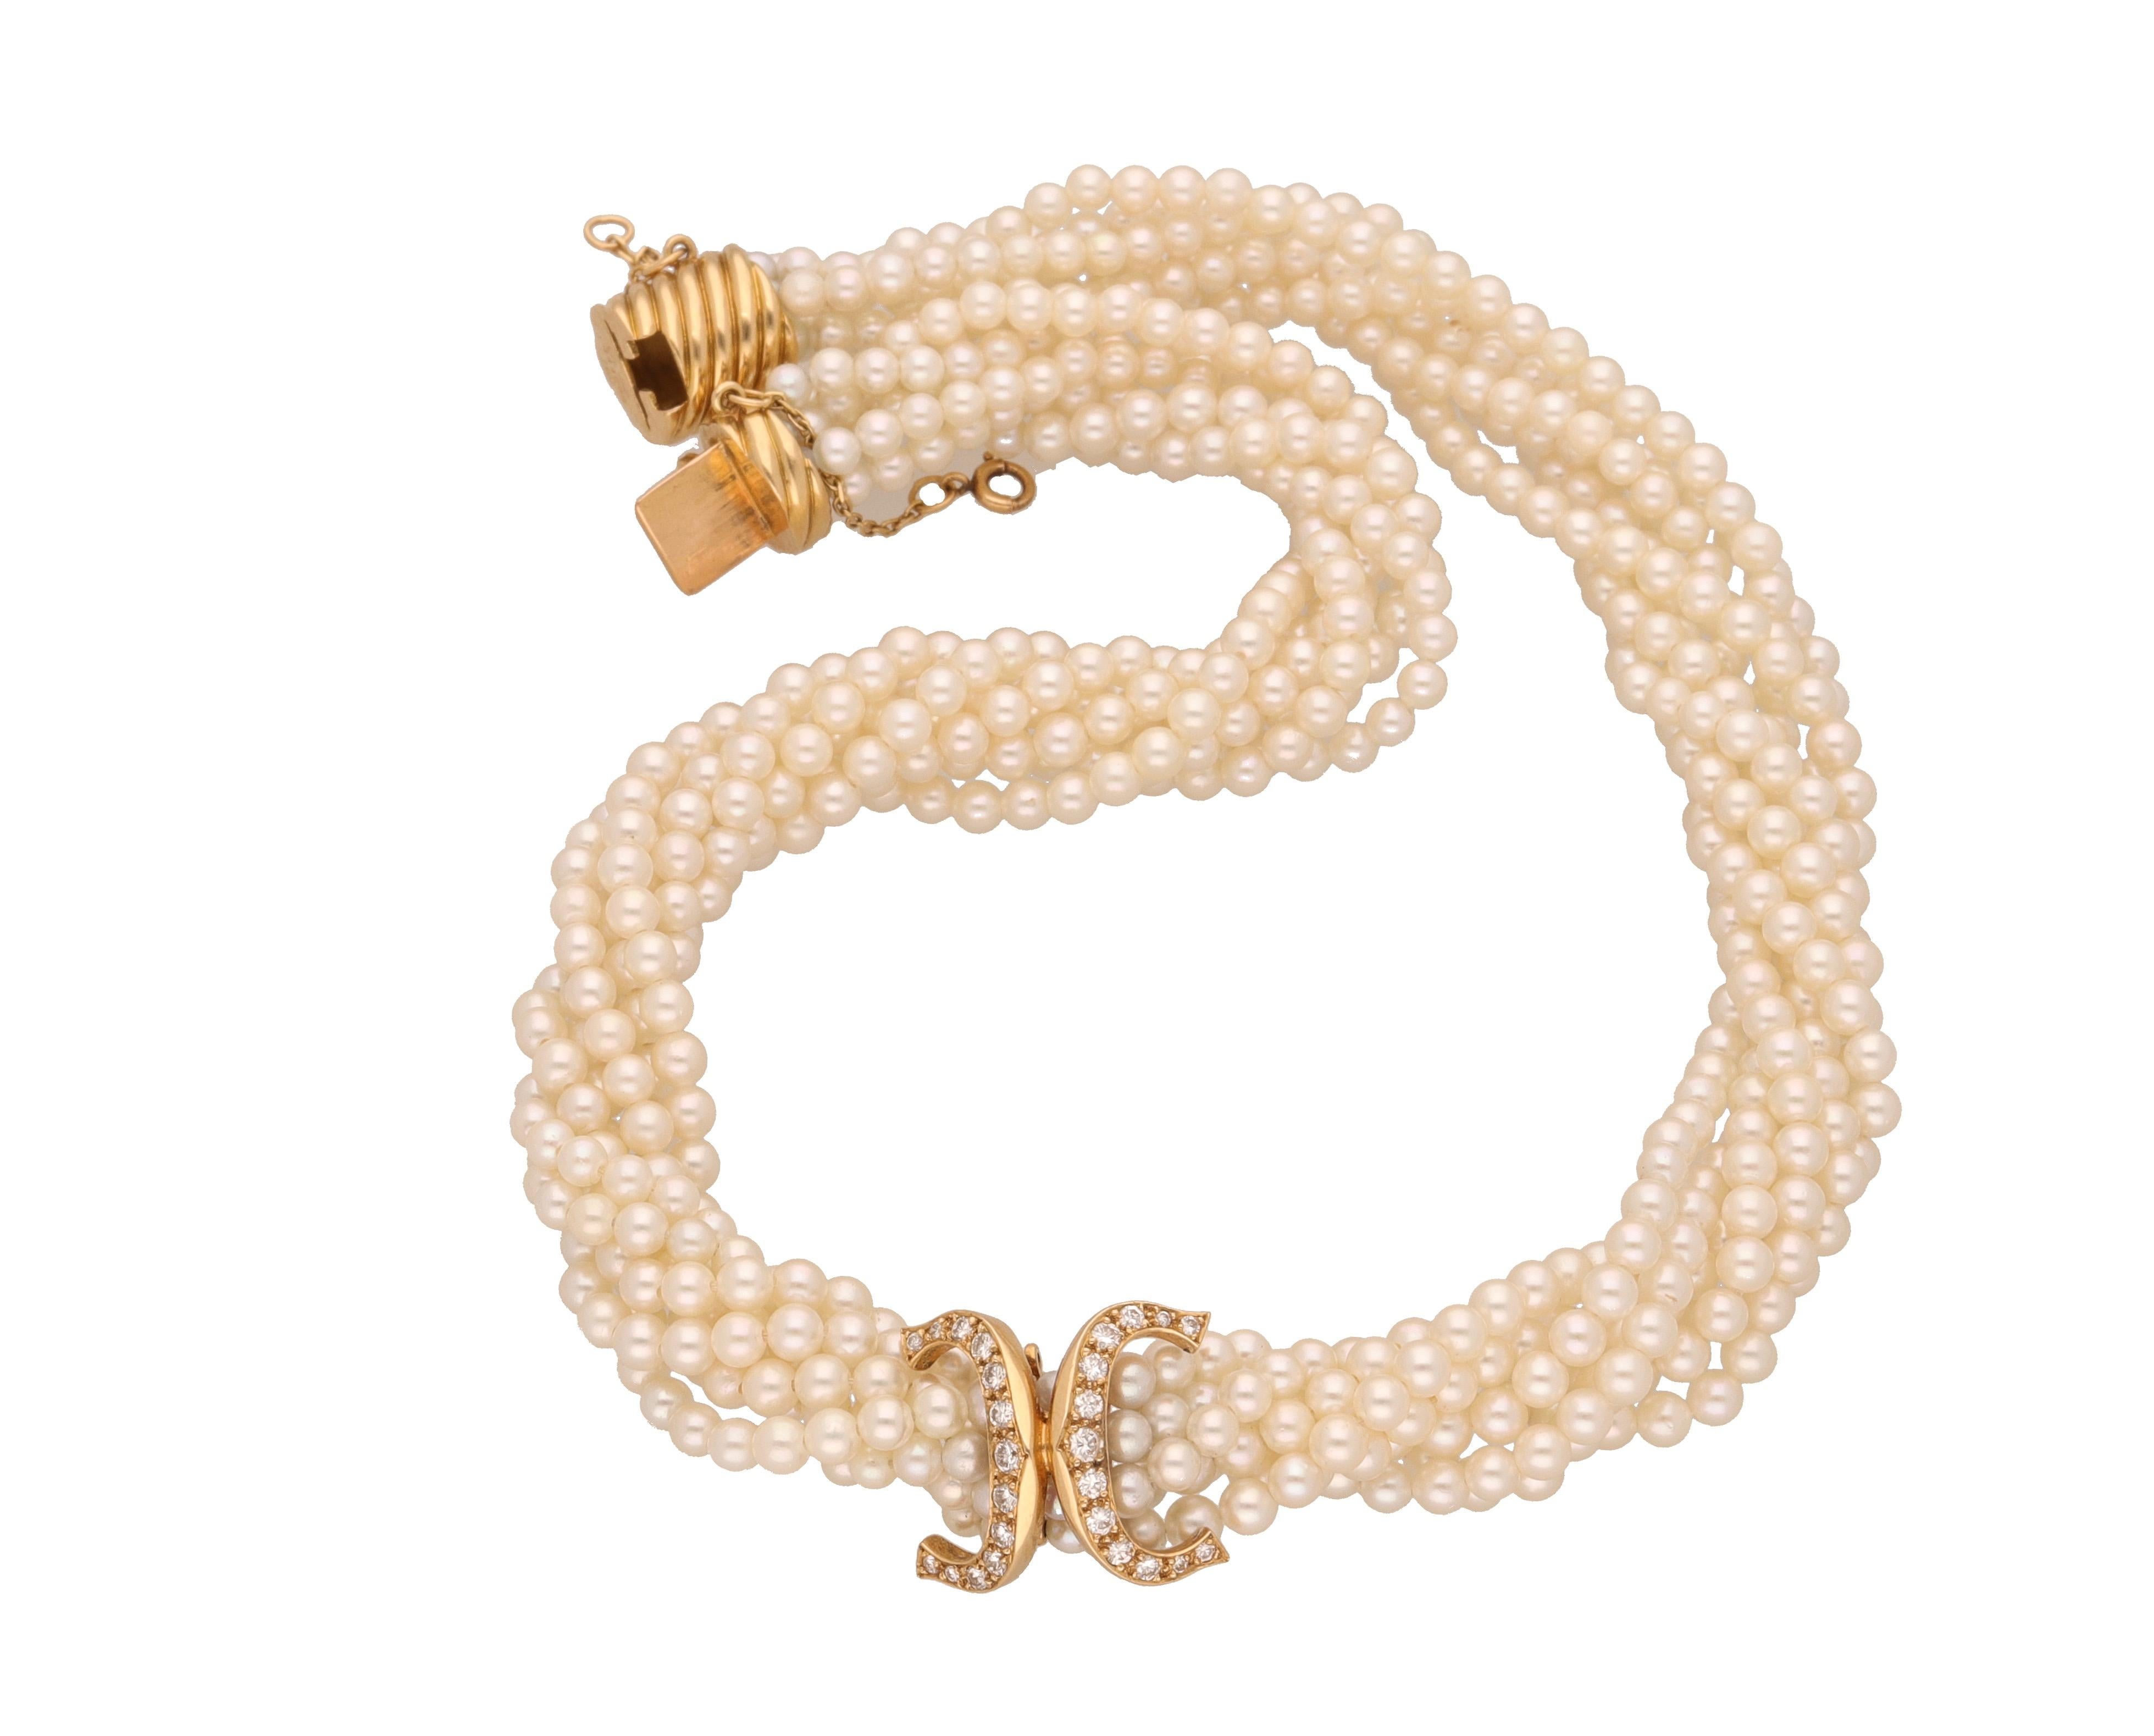 18 kt. gold multi-strand cultured seed pearls necklace.
The pearls are around 3.00 mm. in diameter, 7 strands.
In the middle of the necklace there is a double C setted with 1.00 carat ca. of round-cut diamonds.
Length included clasp is cm.